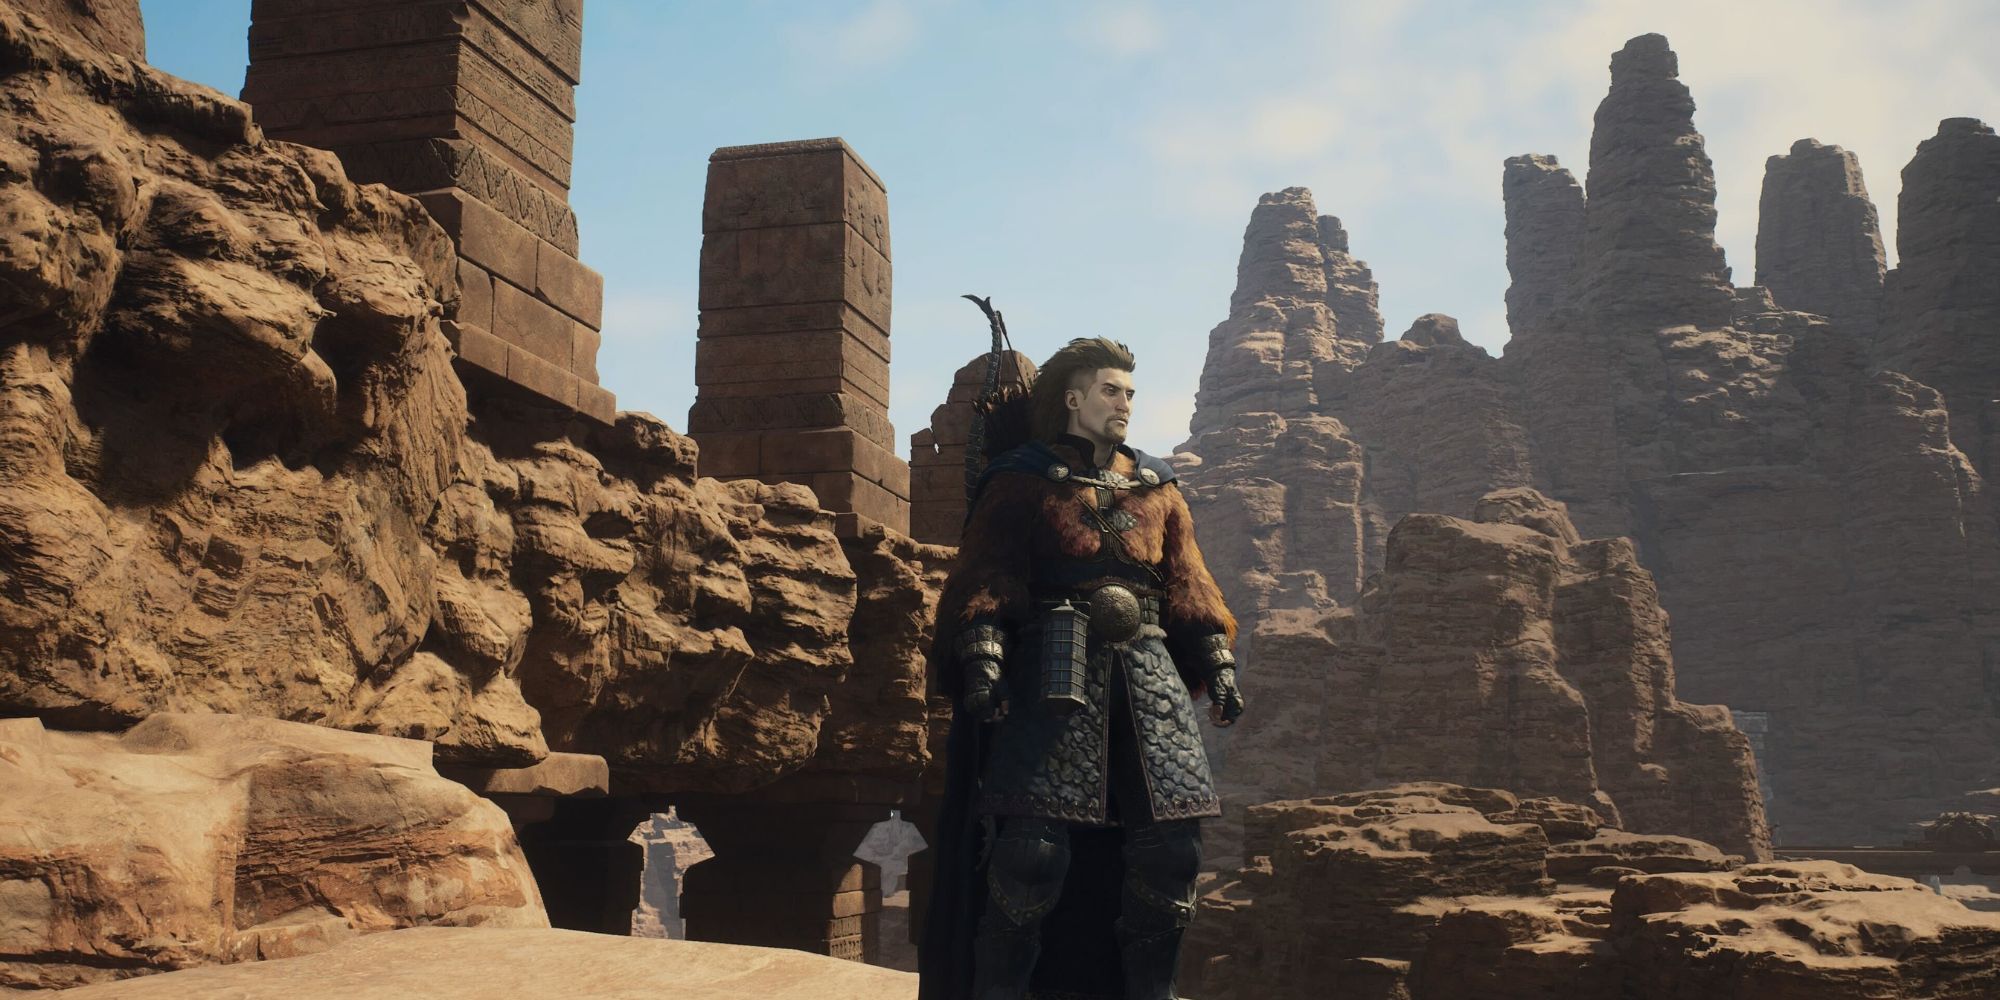 A Dragon's Dogma 2 player standing with a rocky backdrop behind them